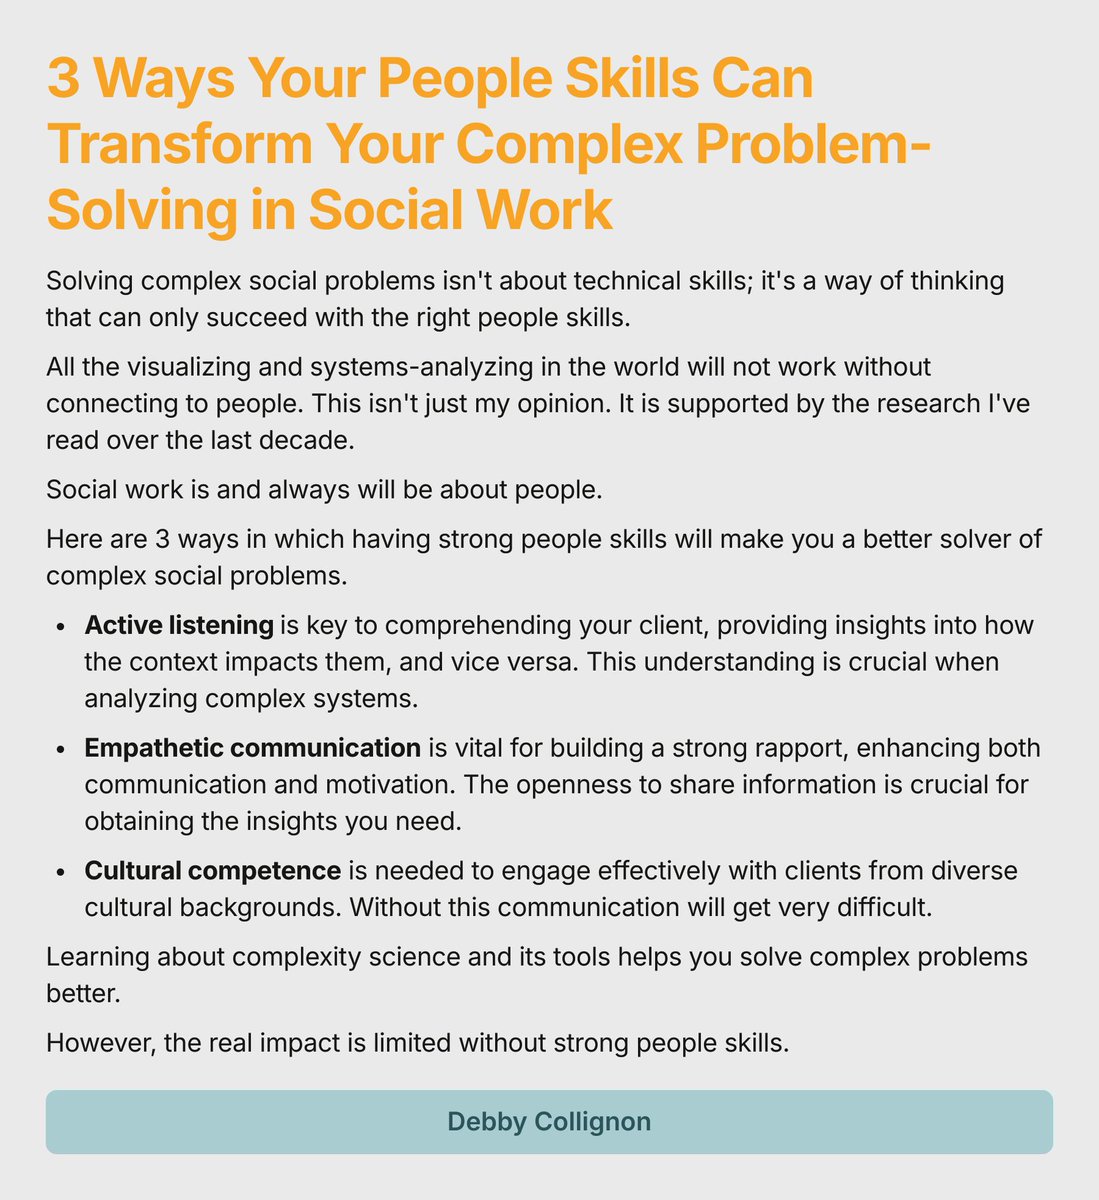 3 Ways Your People Skills Can Transform Your Complex Problem-Solving in Social Work

#SocialWorkSkills
#PeopleSkills
#ComplexProblemSolving
#ActiveListening
#EmpatheticCommunication
#CulturalCompetence
#SocialWorkInsights
#UnderstandingComplexity